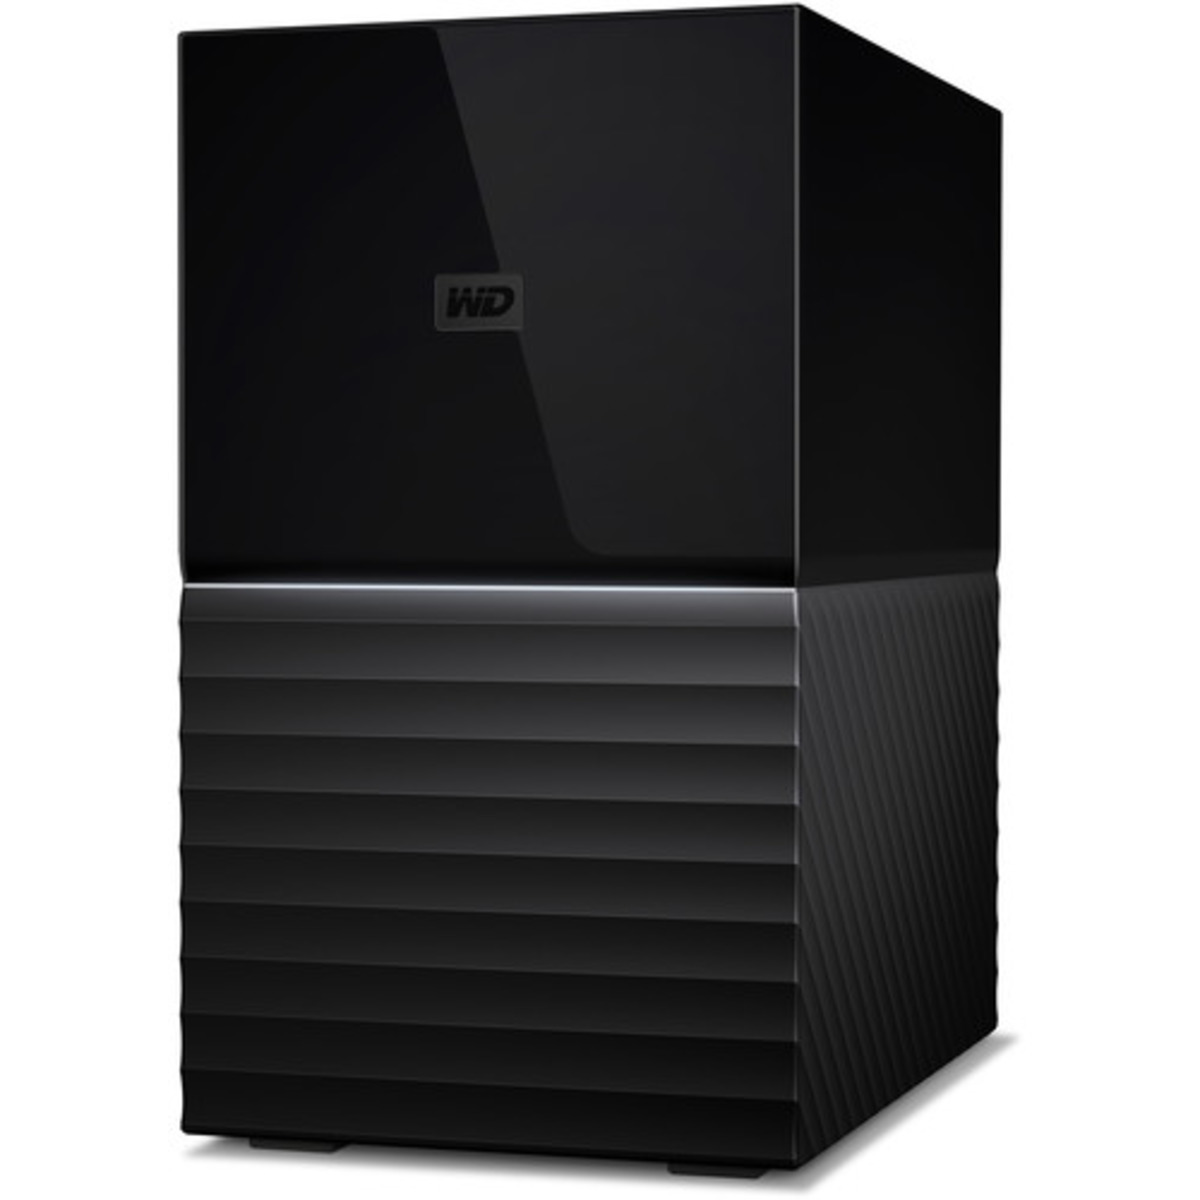 buy $451 Western Digital My Book DUO Gen 2 6tb Desktop DAS - Direct Attached Storage Device 2x3000gb Western Digital Red Plus WD30EFZX 3.5 5400rpm SATA 6Gb/s HDD NAS Class Drives Installed - Burn-In Tested - ON SALE - nas headquarters buy network attached storage server device das new raid-5 free shipping usa christmas new year holiday sale My Book DUO Gen 2